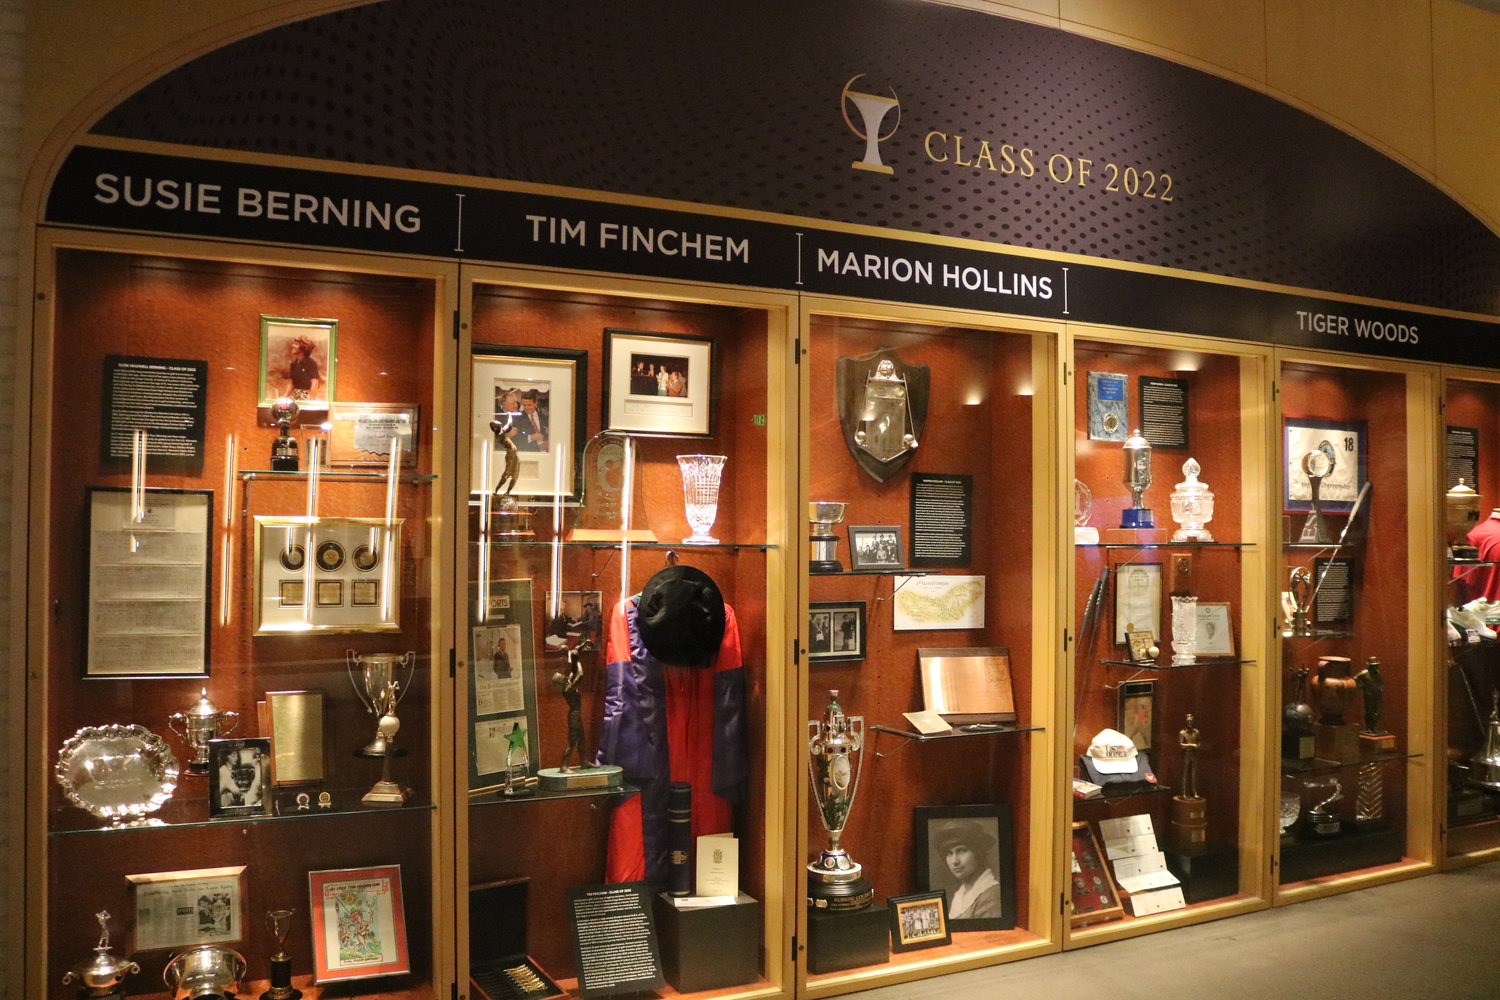 A new exhibit at the World Golf Hall of Fame features displays on each of this year’s class of 2022 inductees.